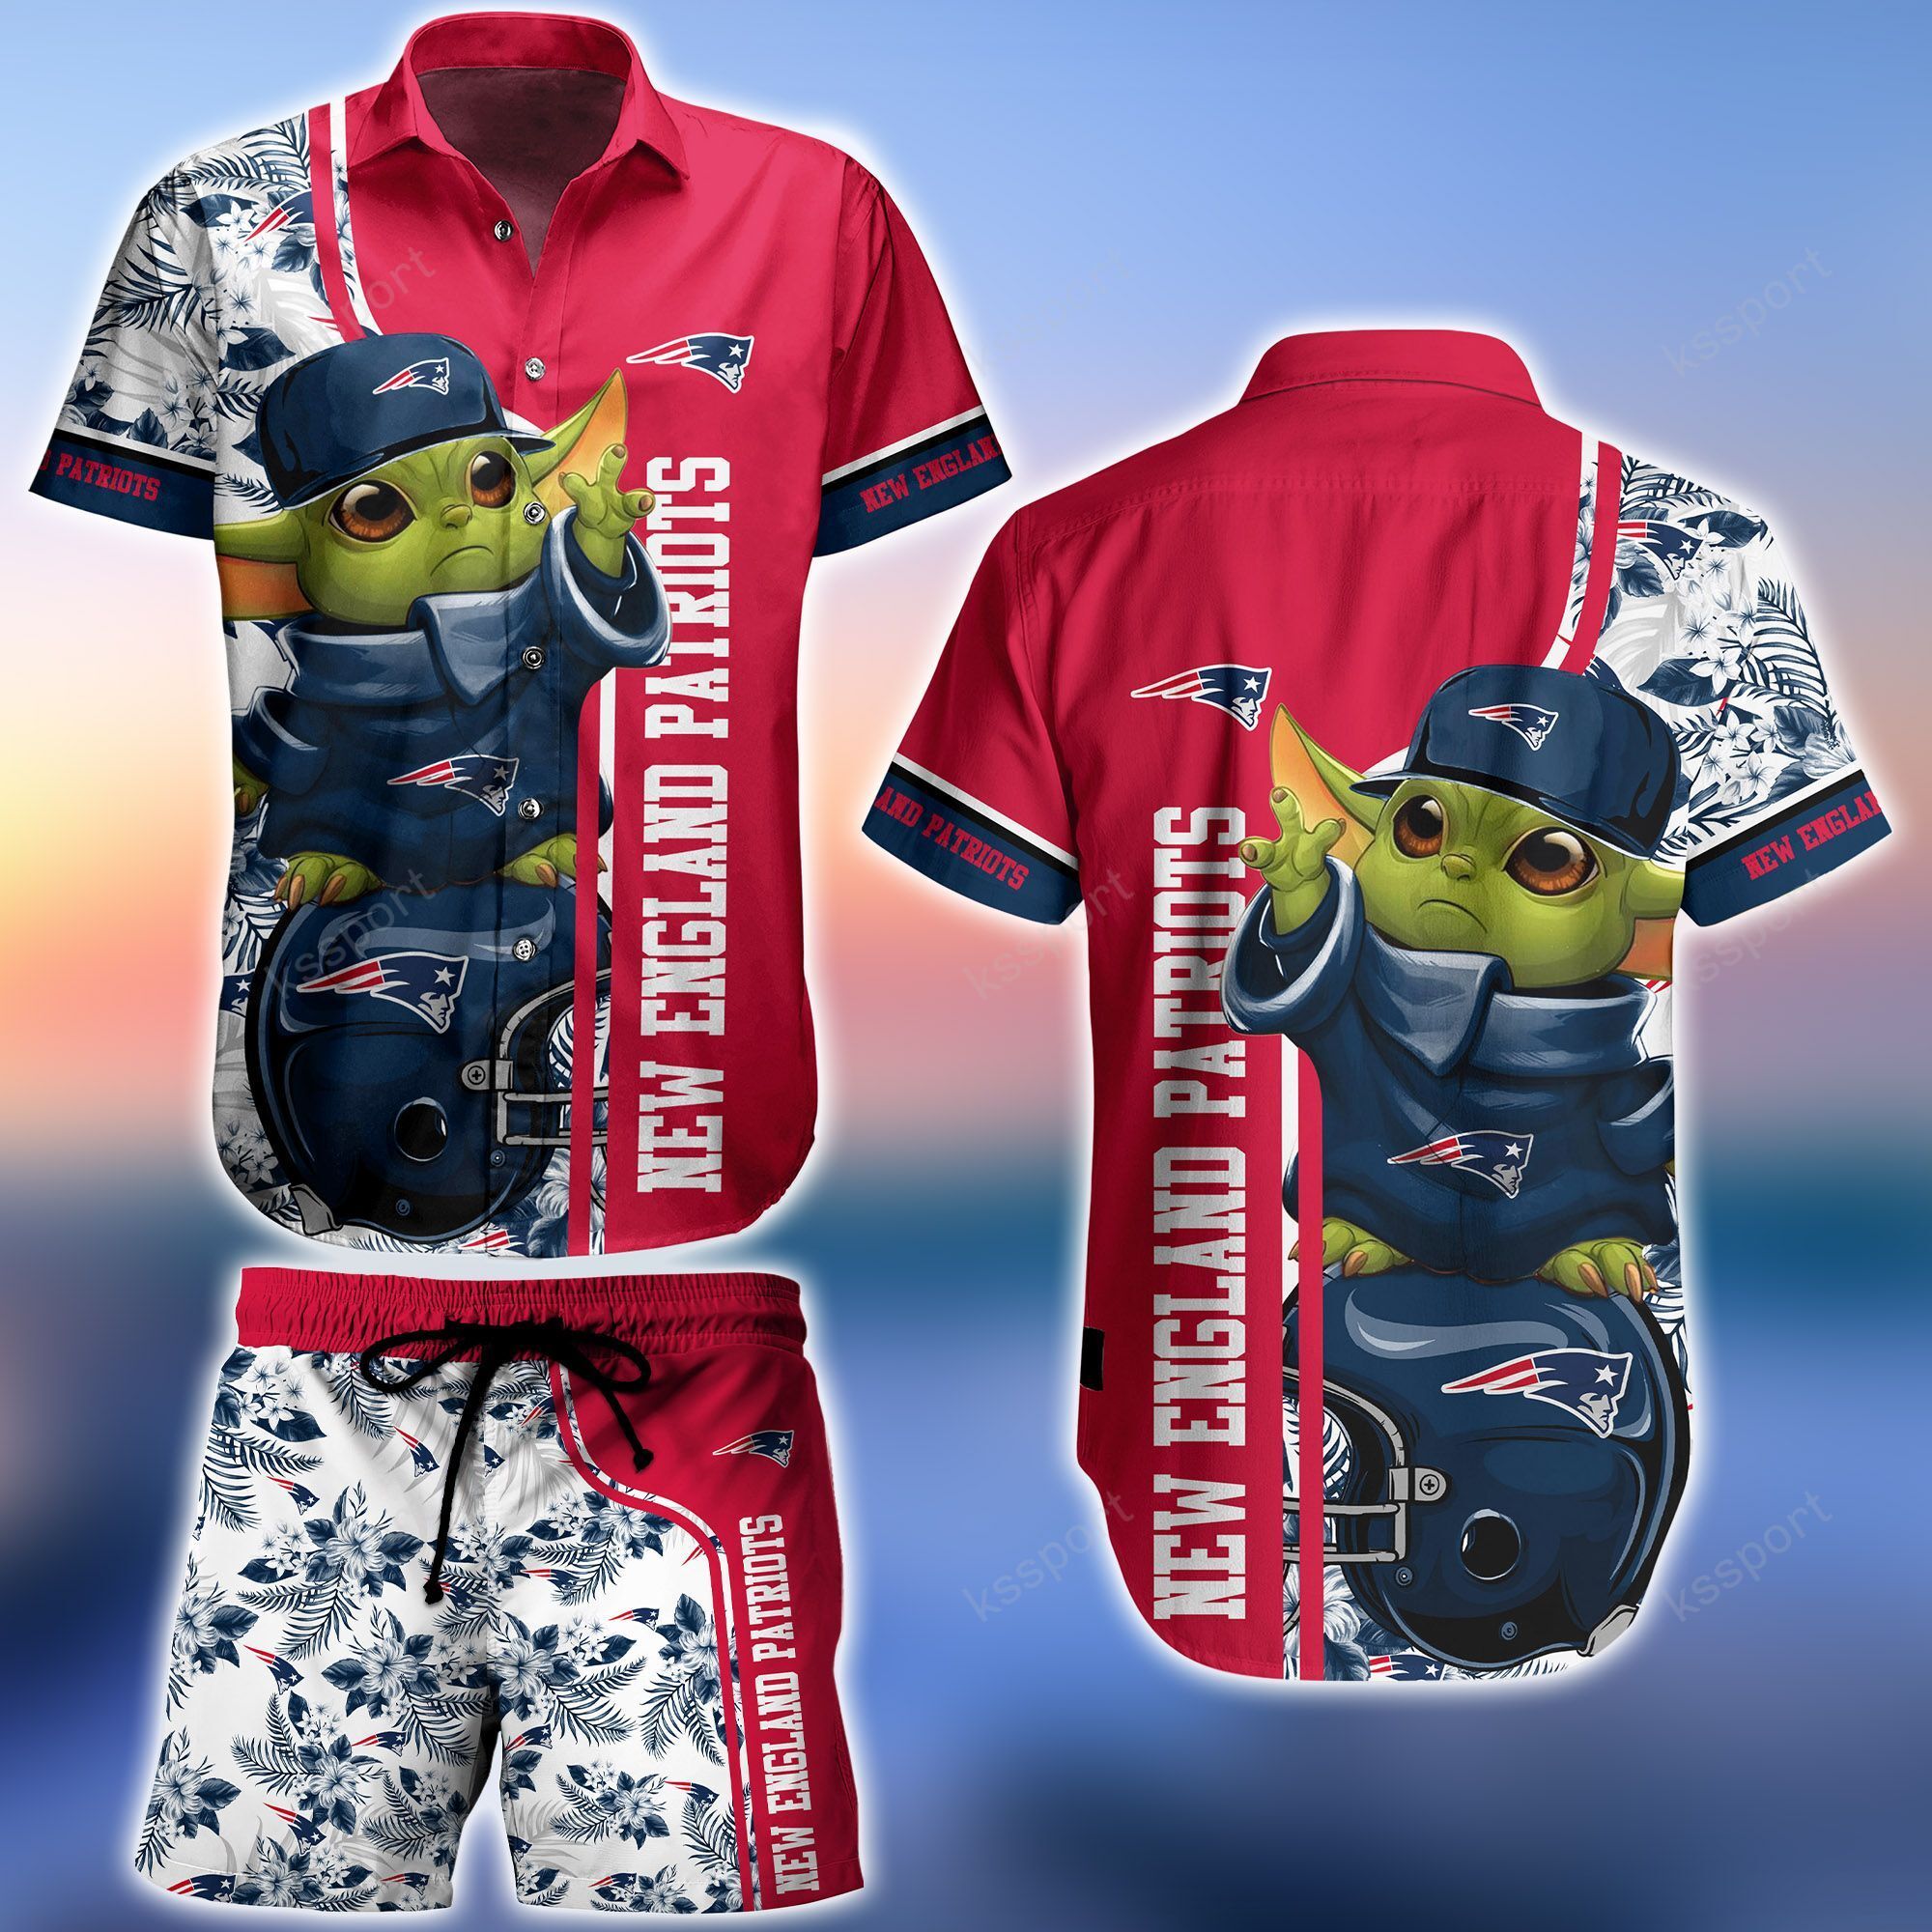 Make sure to check out the latest summer fashion on our website 31